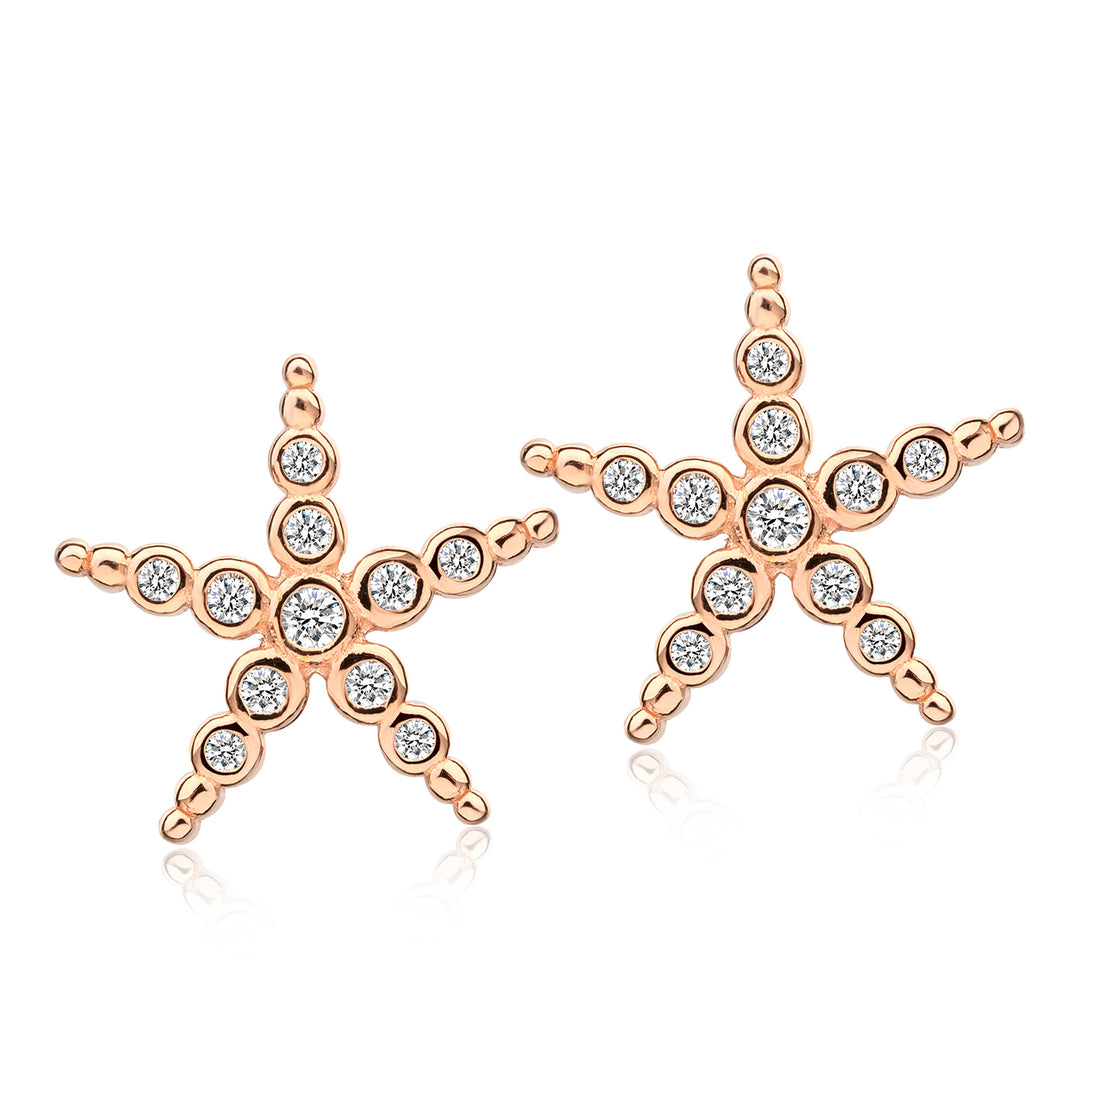 Star stud earrings encrusted in sparkling cubic zirconia stones made from rose-gold.